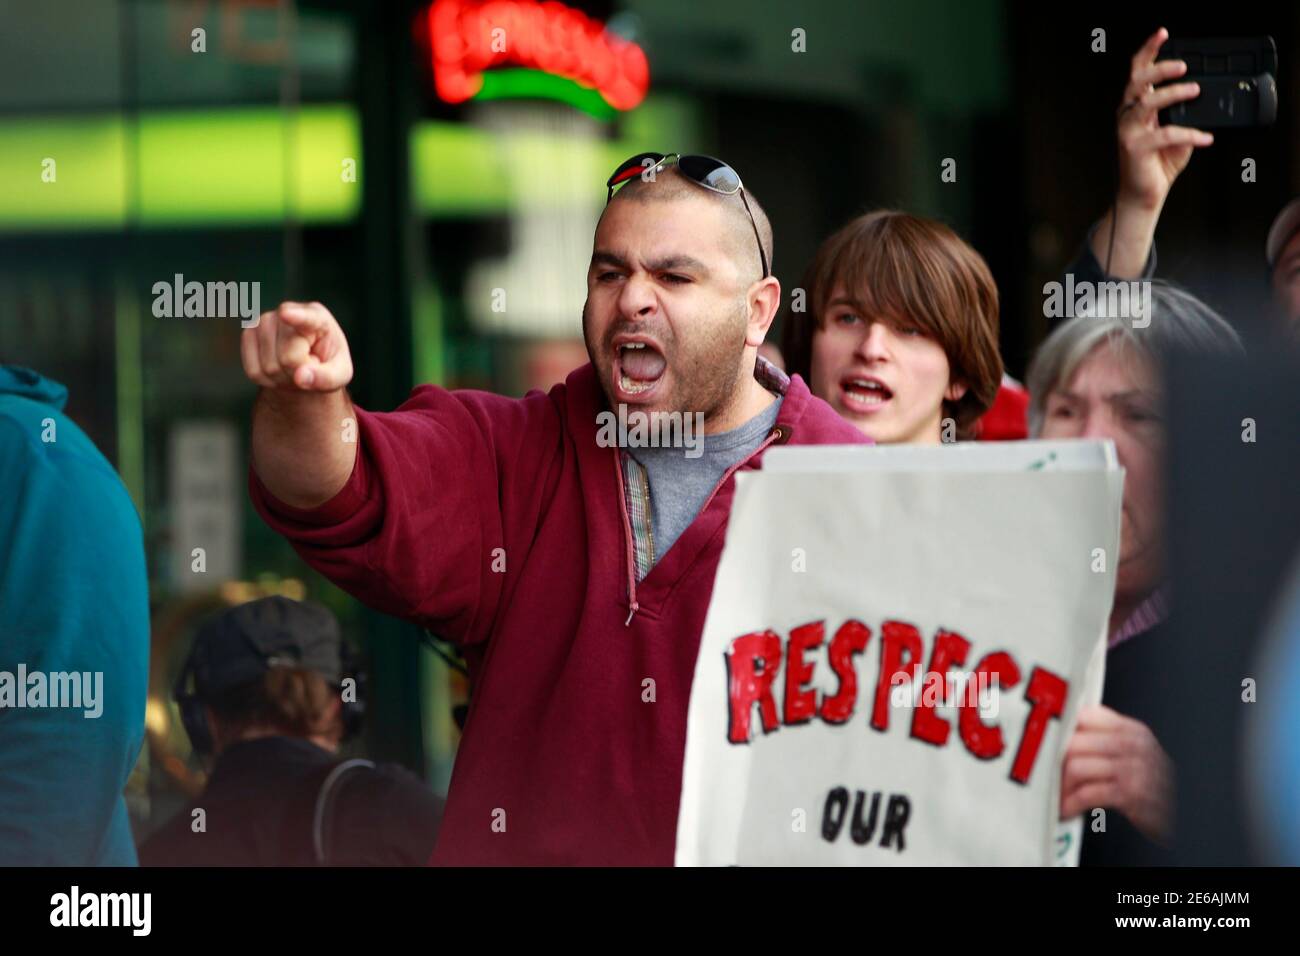 A man chants in protest as federal agents conduct a raid on Oaksterdam University, a cannabis cultivation college, in Oakland, California April 2, 2012. Federal agents raided a cannabis cultivation college on Monday in the San Francisco Bay area widely known as the 'Princeton of Pot' and the 'Harvard of Hemp,' authorities said, as the U.S. government pressed its clamp-down on medical marijuana. REUTERS/Stephen Lam (UNITED STATES - Tags: CRIME LAW DRUGS SOCIETY CIVIL UNREST) Stock Photo